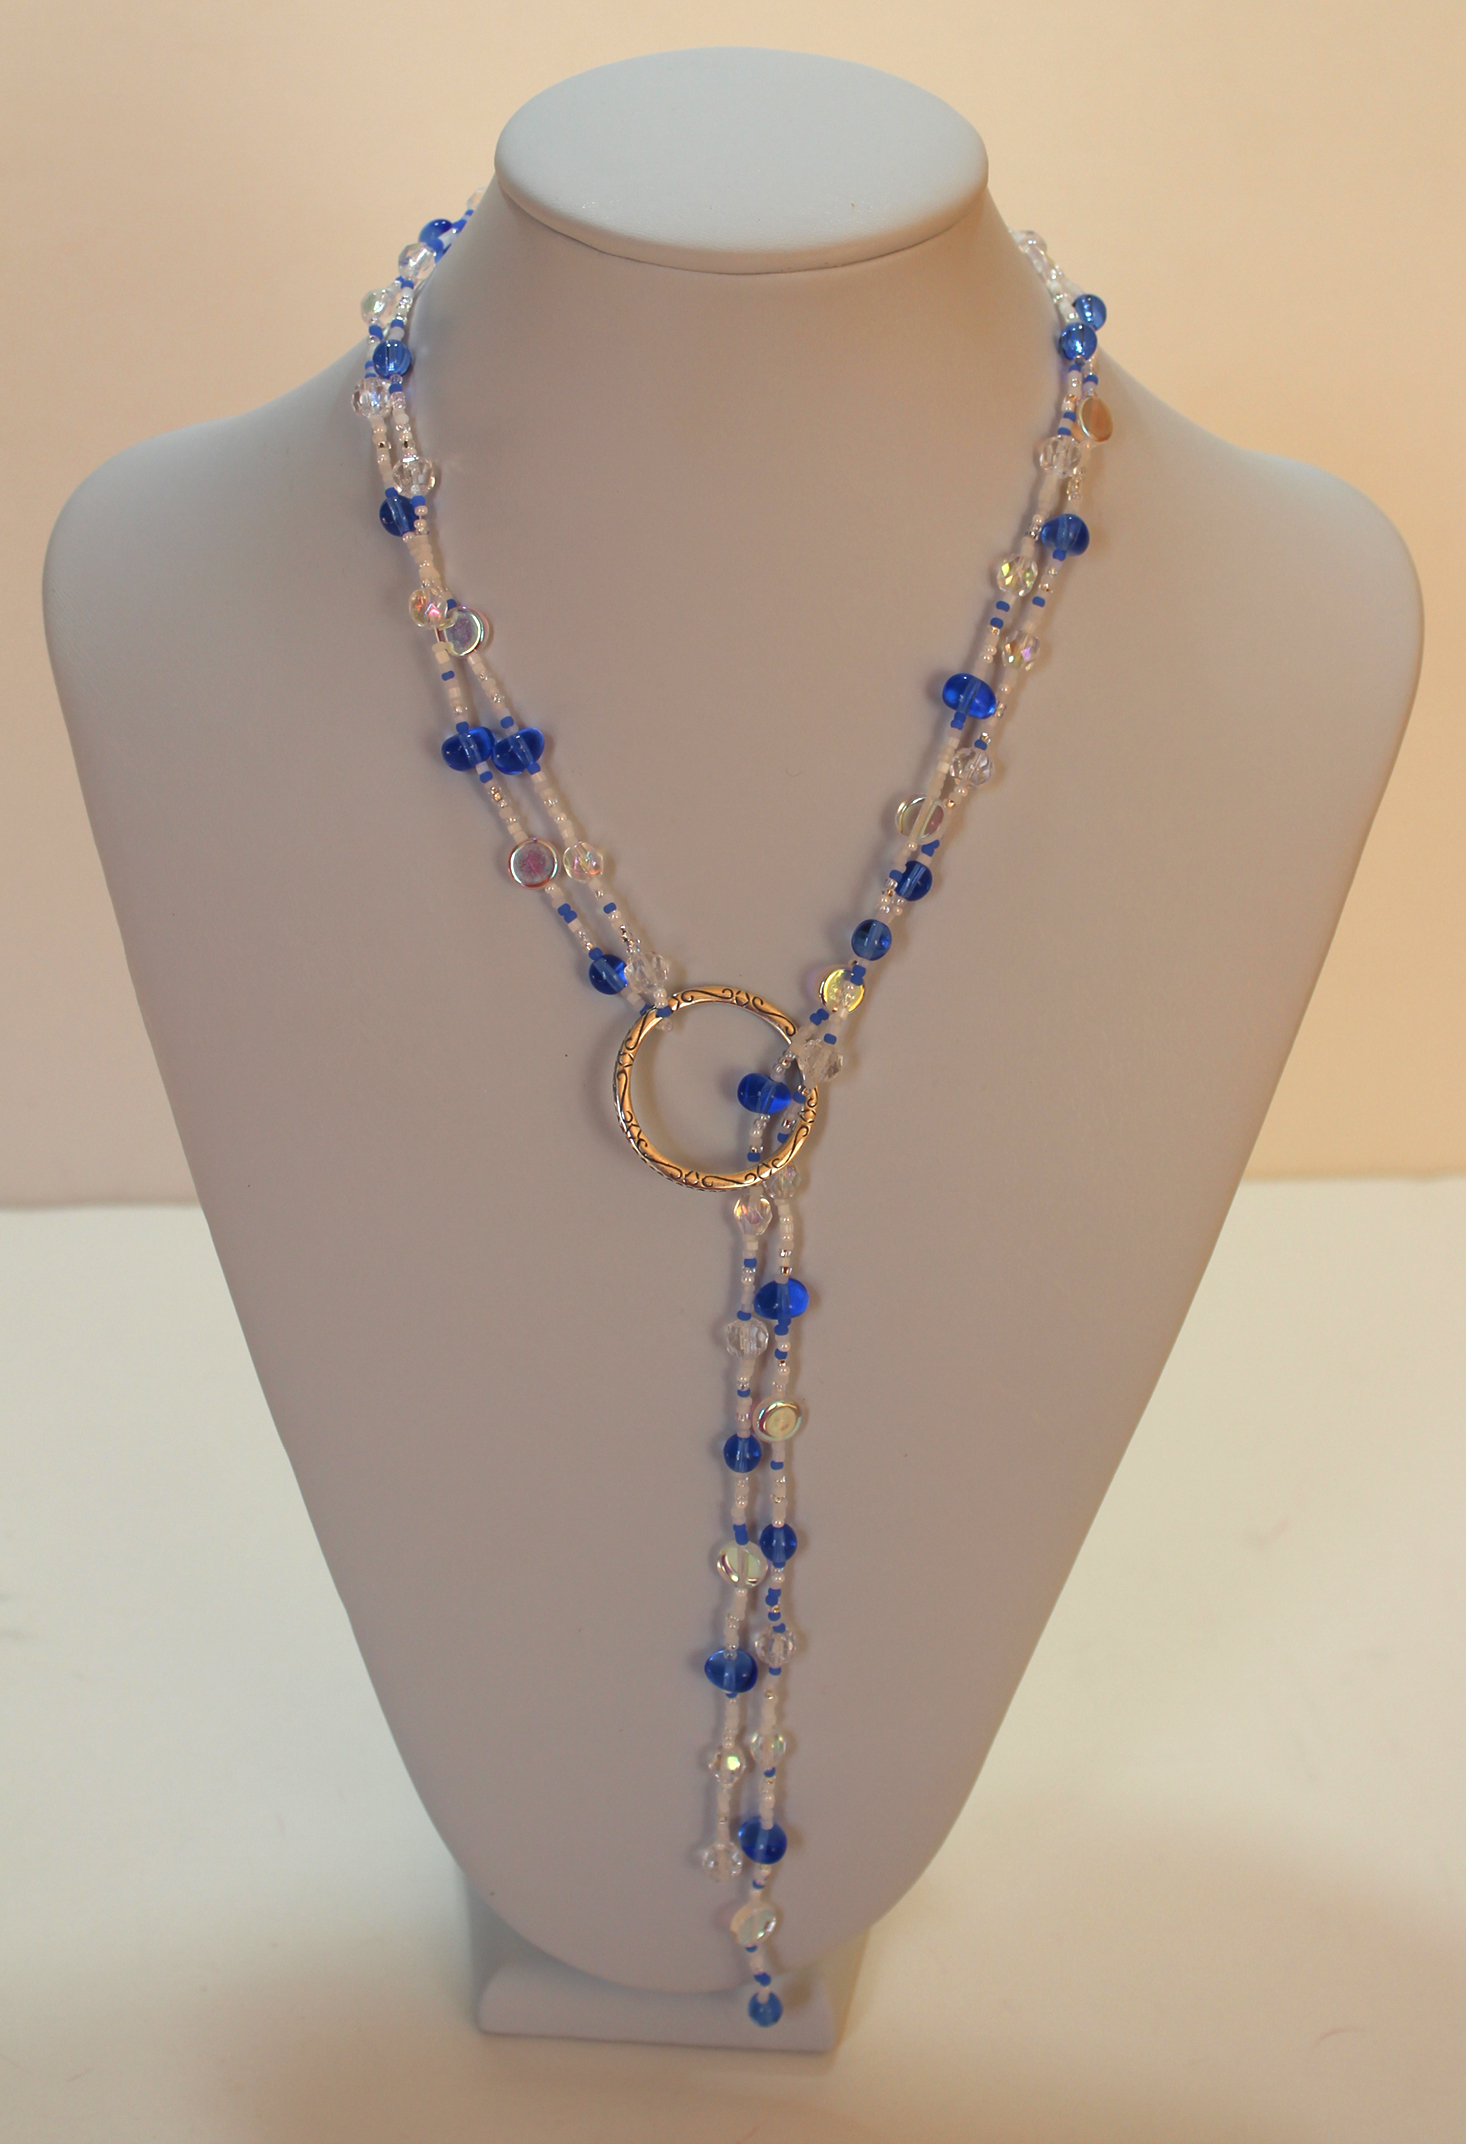 bead-crate-october-2016-necklace2